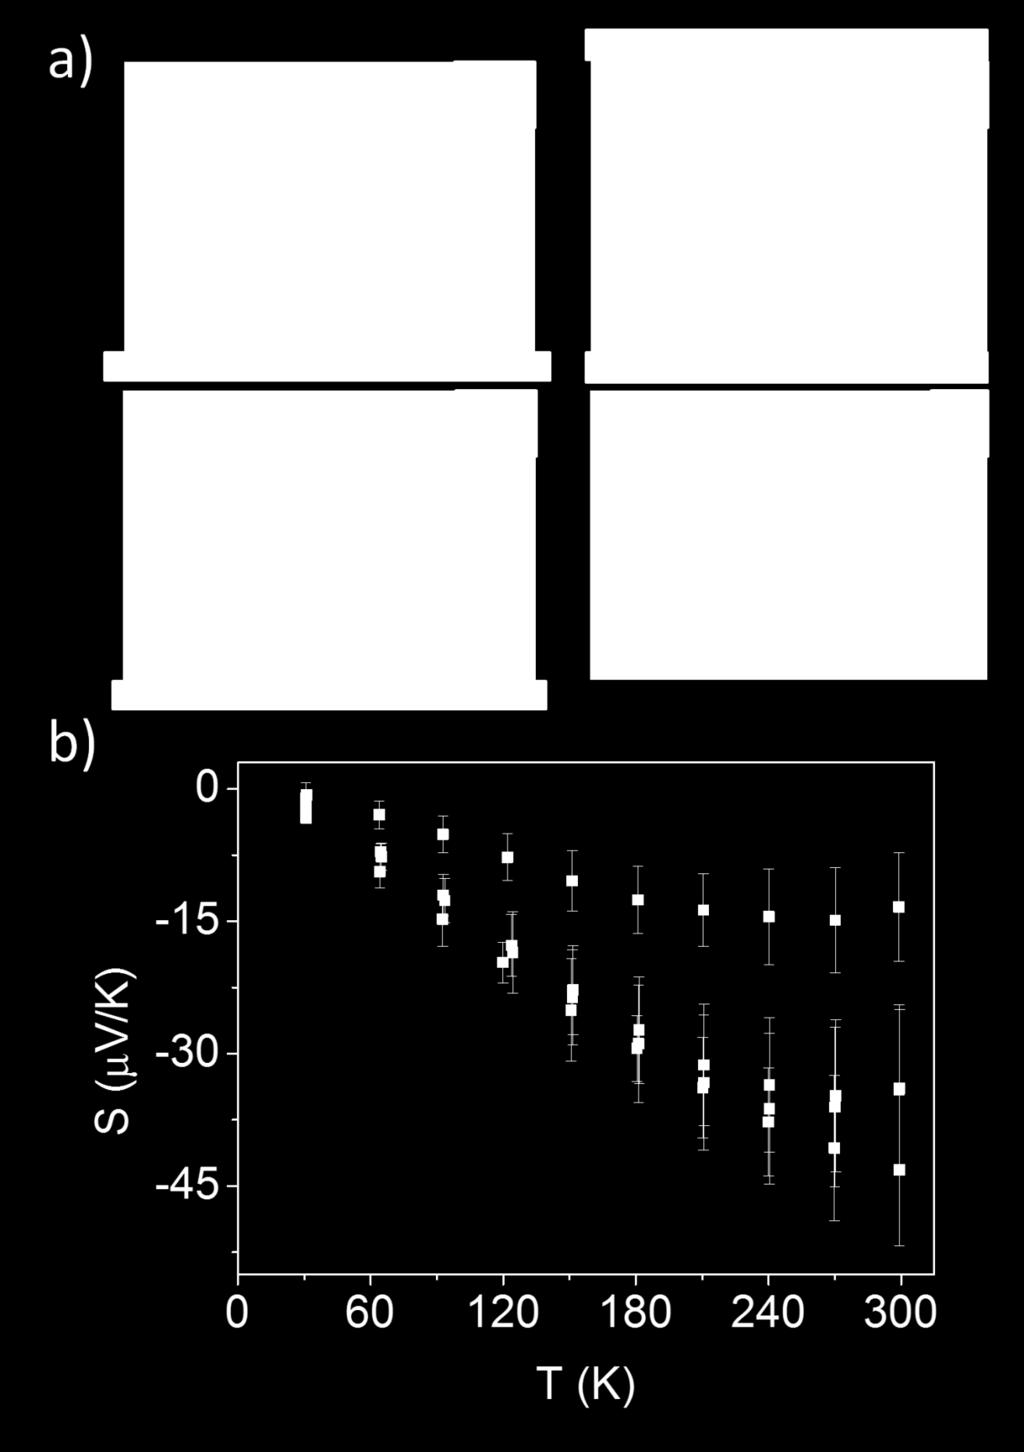 Figure 3.3: Seebeck coefficient of Bi nanowire arrays with wire diameter of 130 ± 10 nm as a function of temperature and cap size and density.